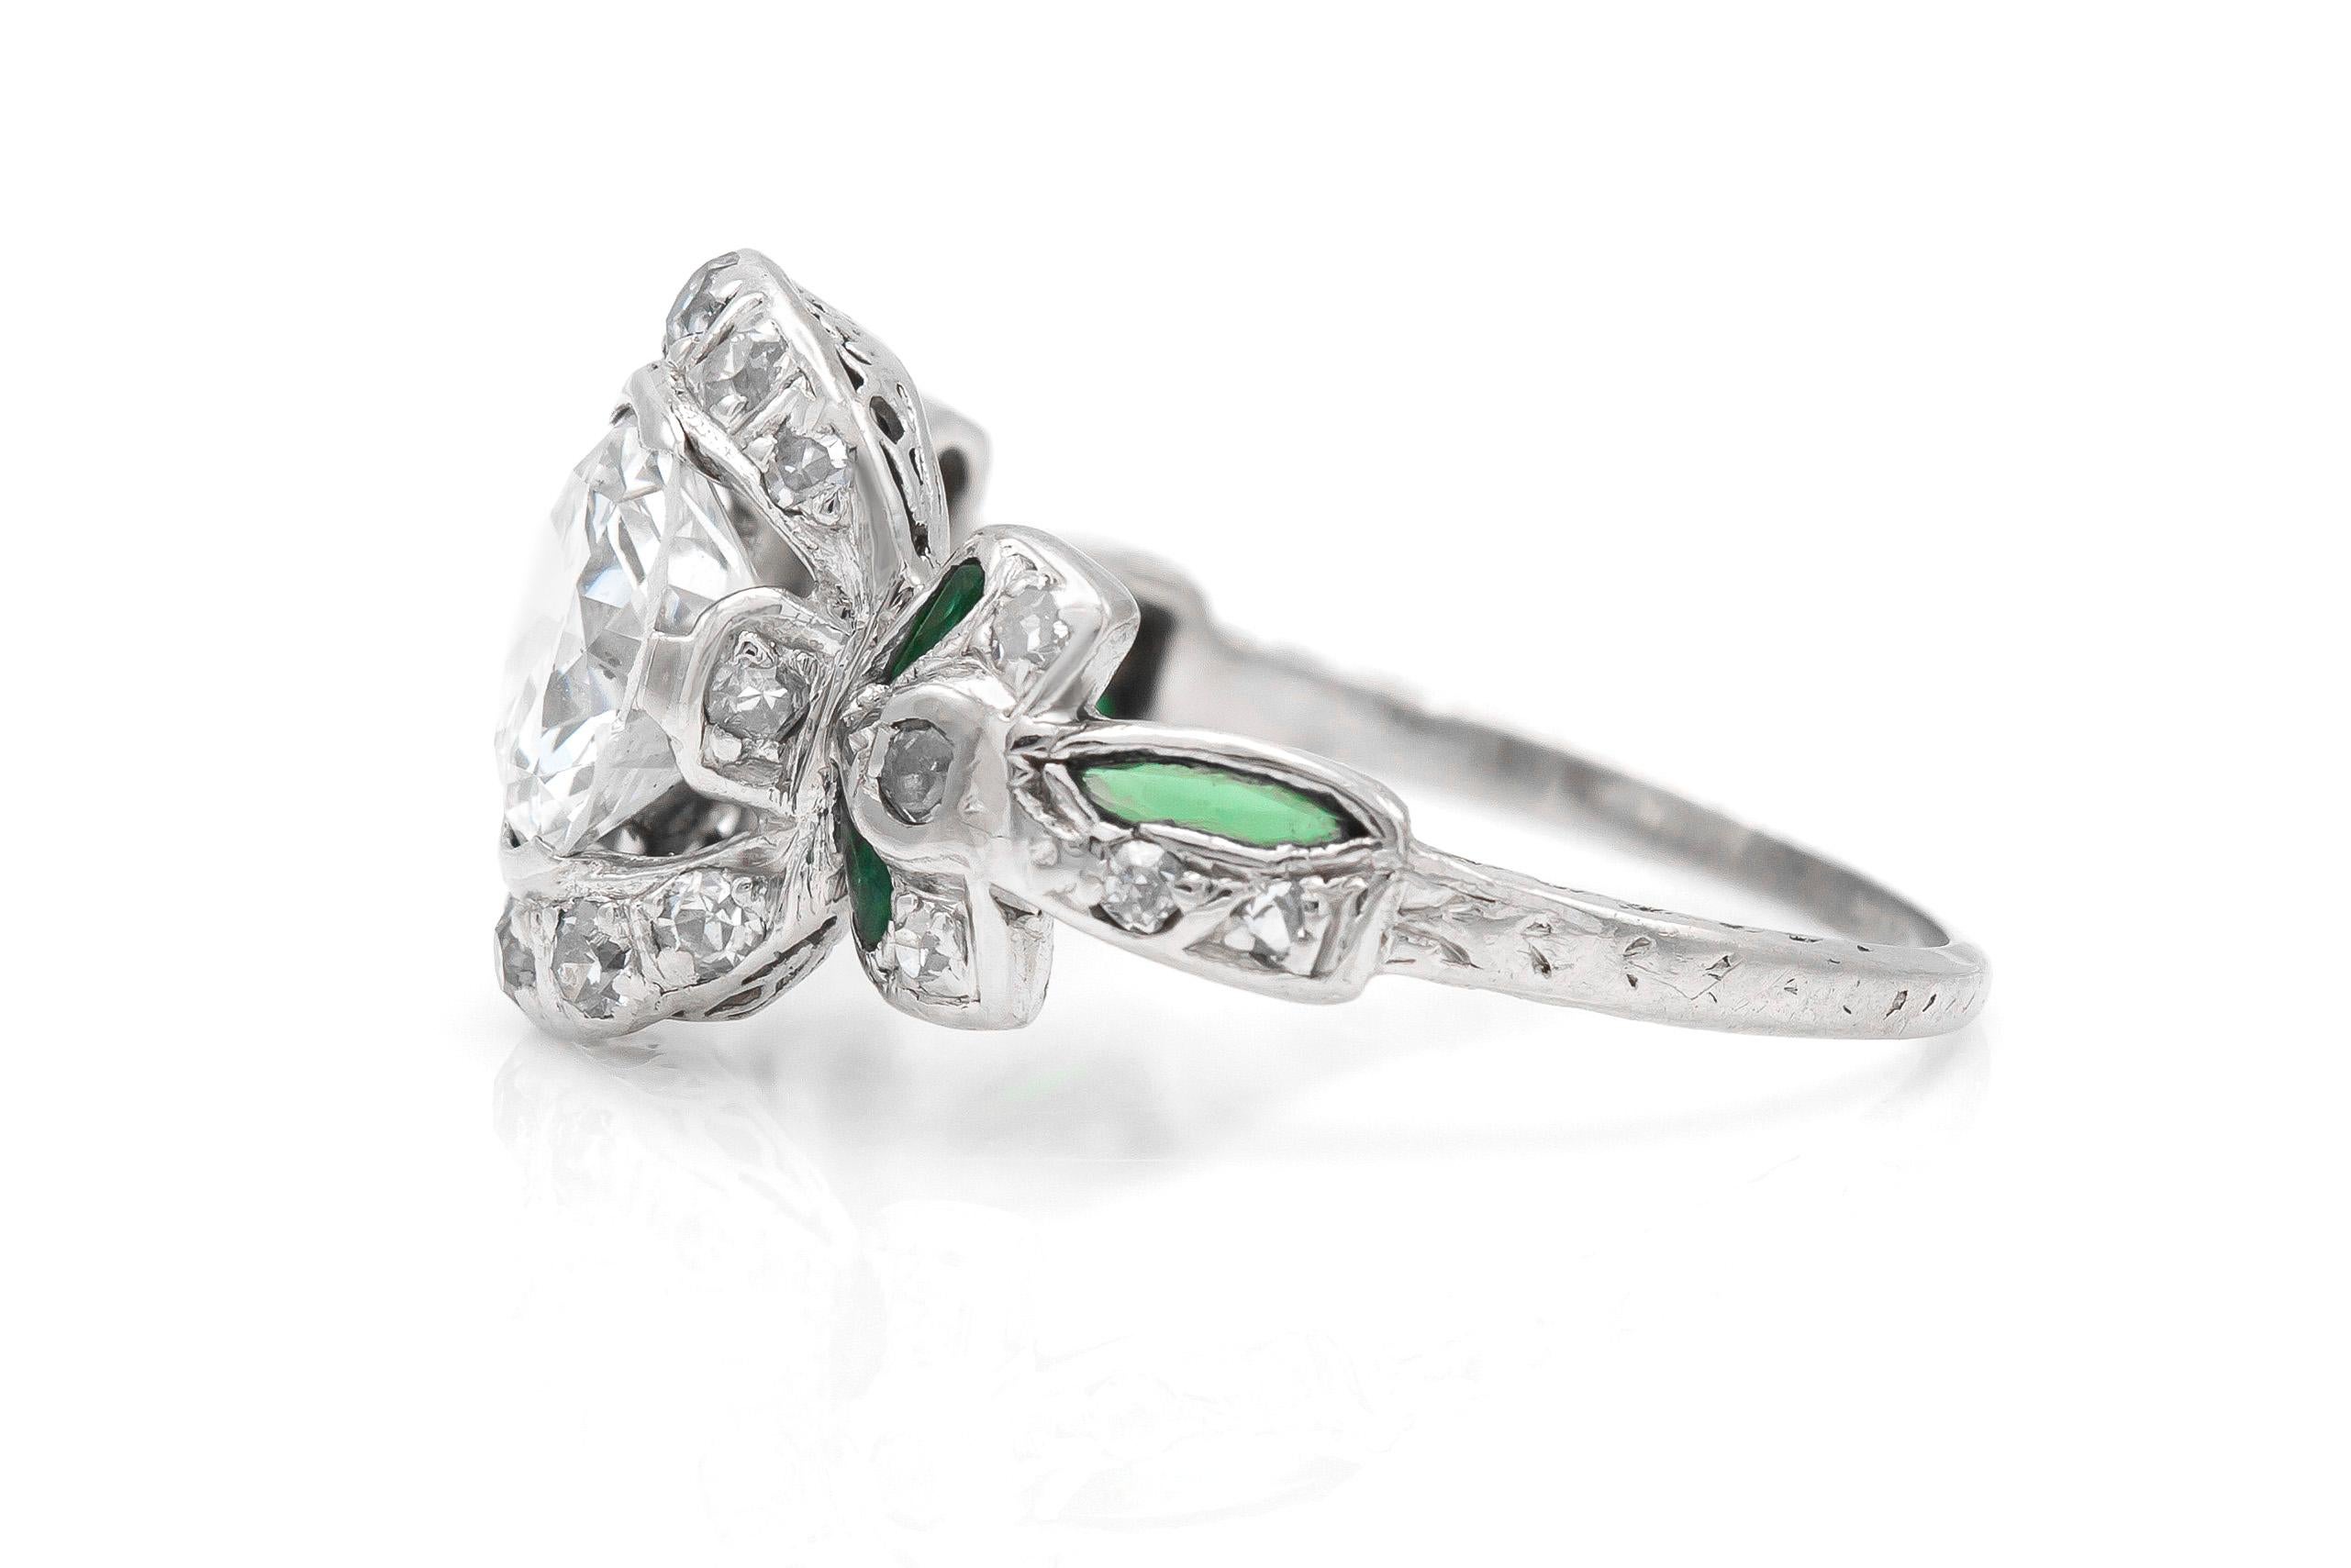 Finely crafted in platinum with an Old European cut center diamond weighing approximately 1.30 carats.
Color G-H       Clarity SI1
The ring features diamonds and emeralds in the setting.
Edwardian, circa 1910s